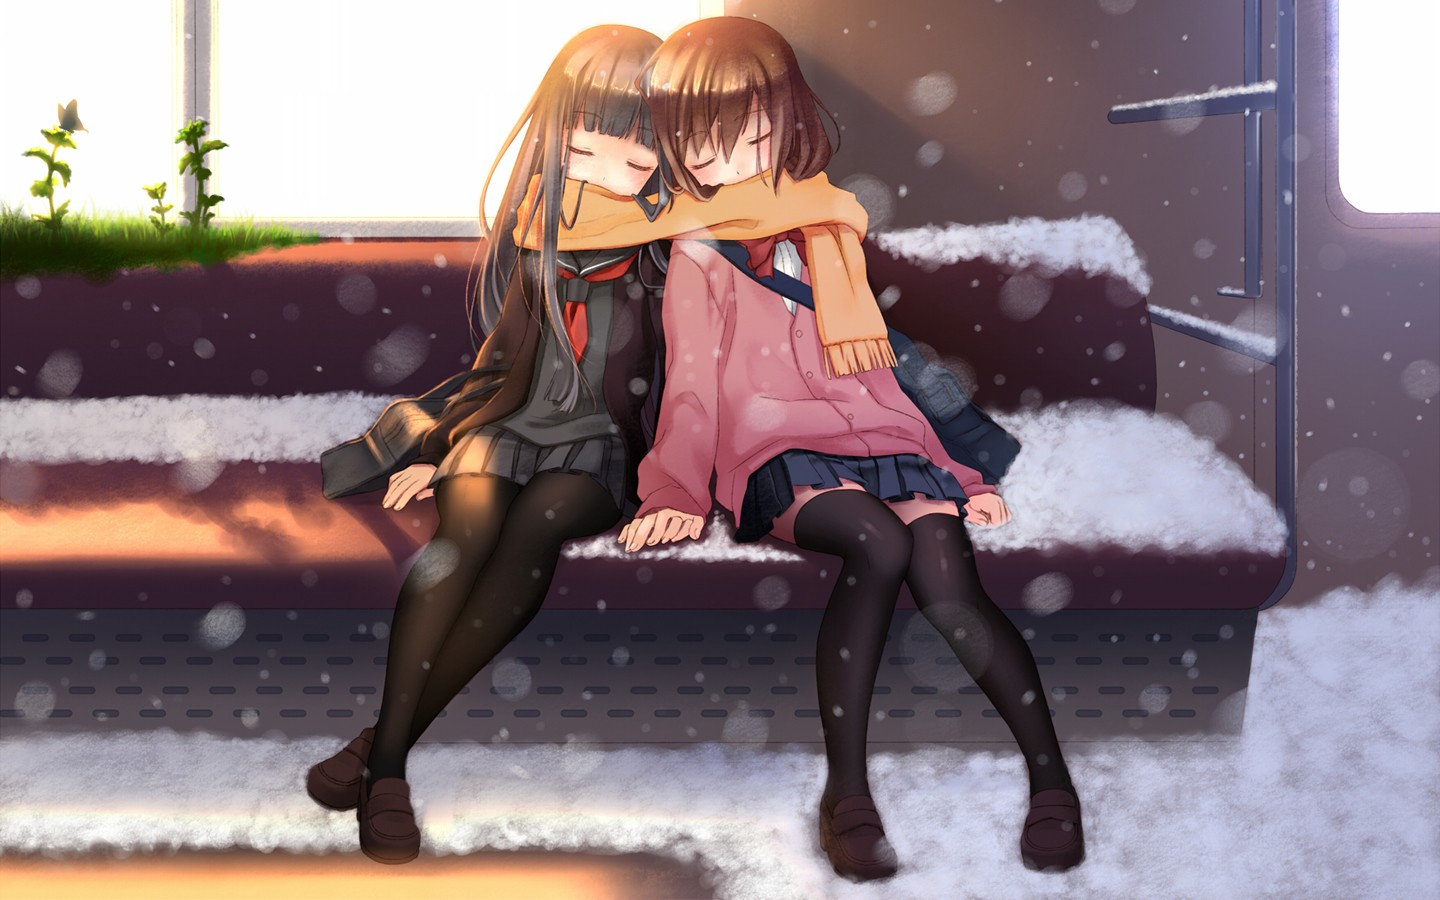 Anime 1440x900 anime girls original characters snow scarf two women legs together knees together sitting closed eyes winter cold outdoors miniskirt stockings pantyhose